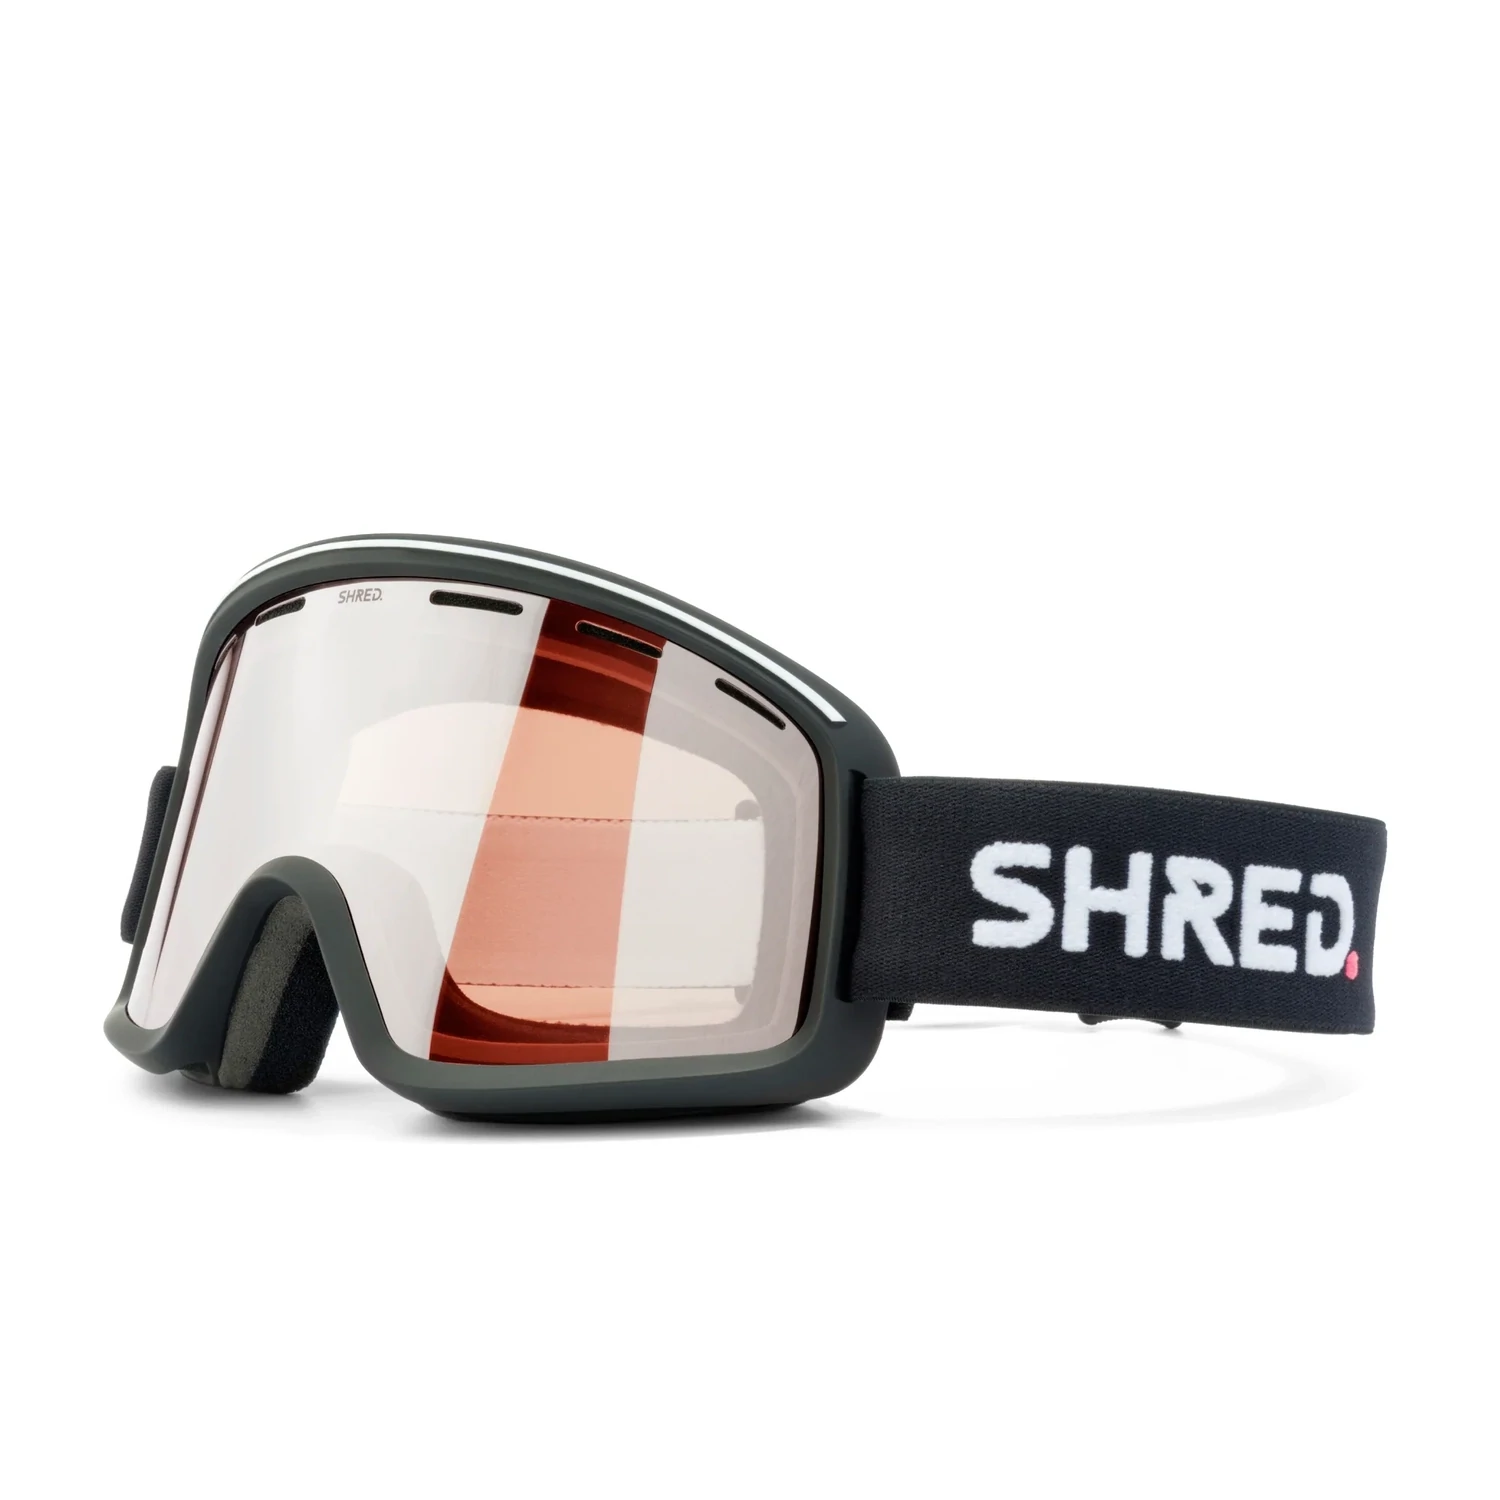 SHRED MONOCLE GOGGLES + LOW LIGHT SILVER 23/24 BLACK